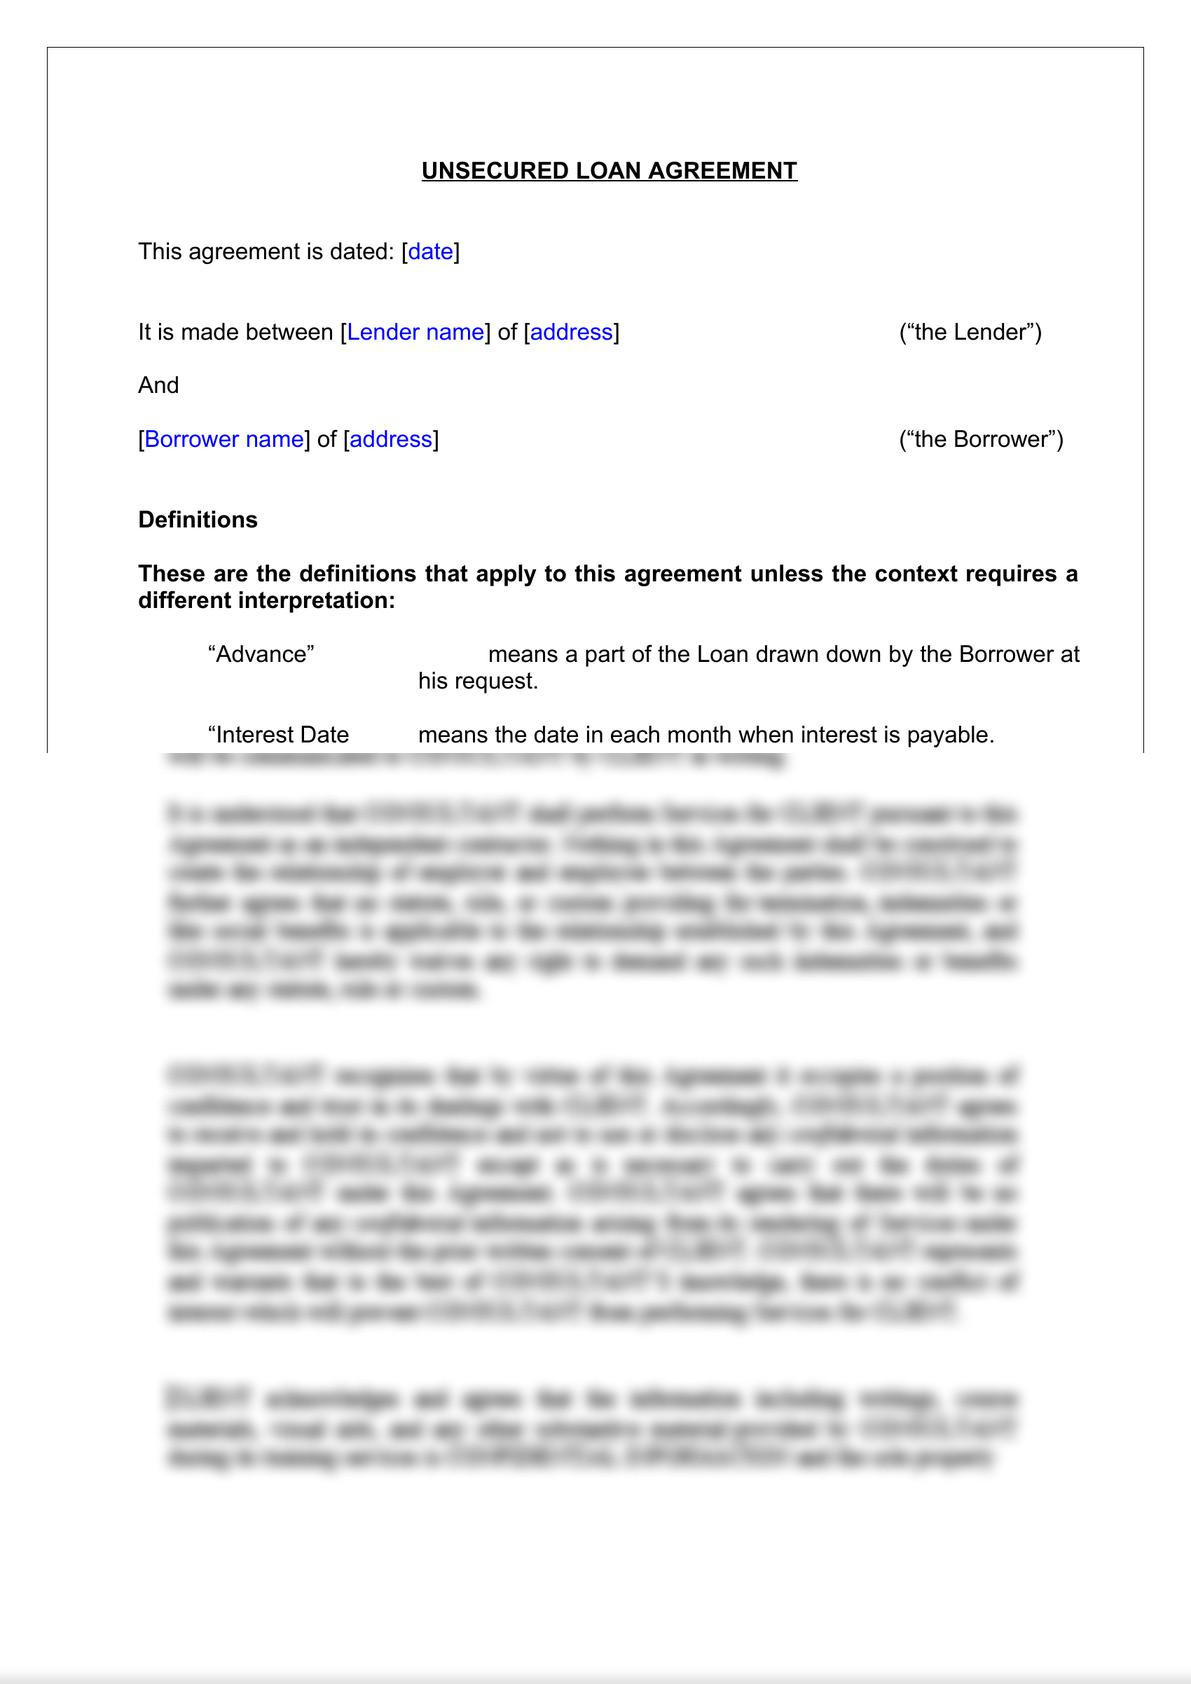 Unsecured Loan Agreement-2